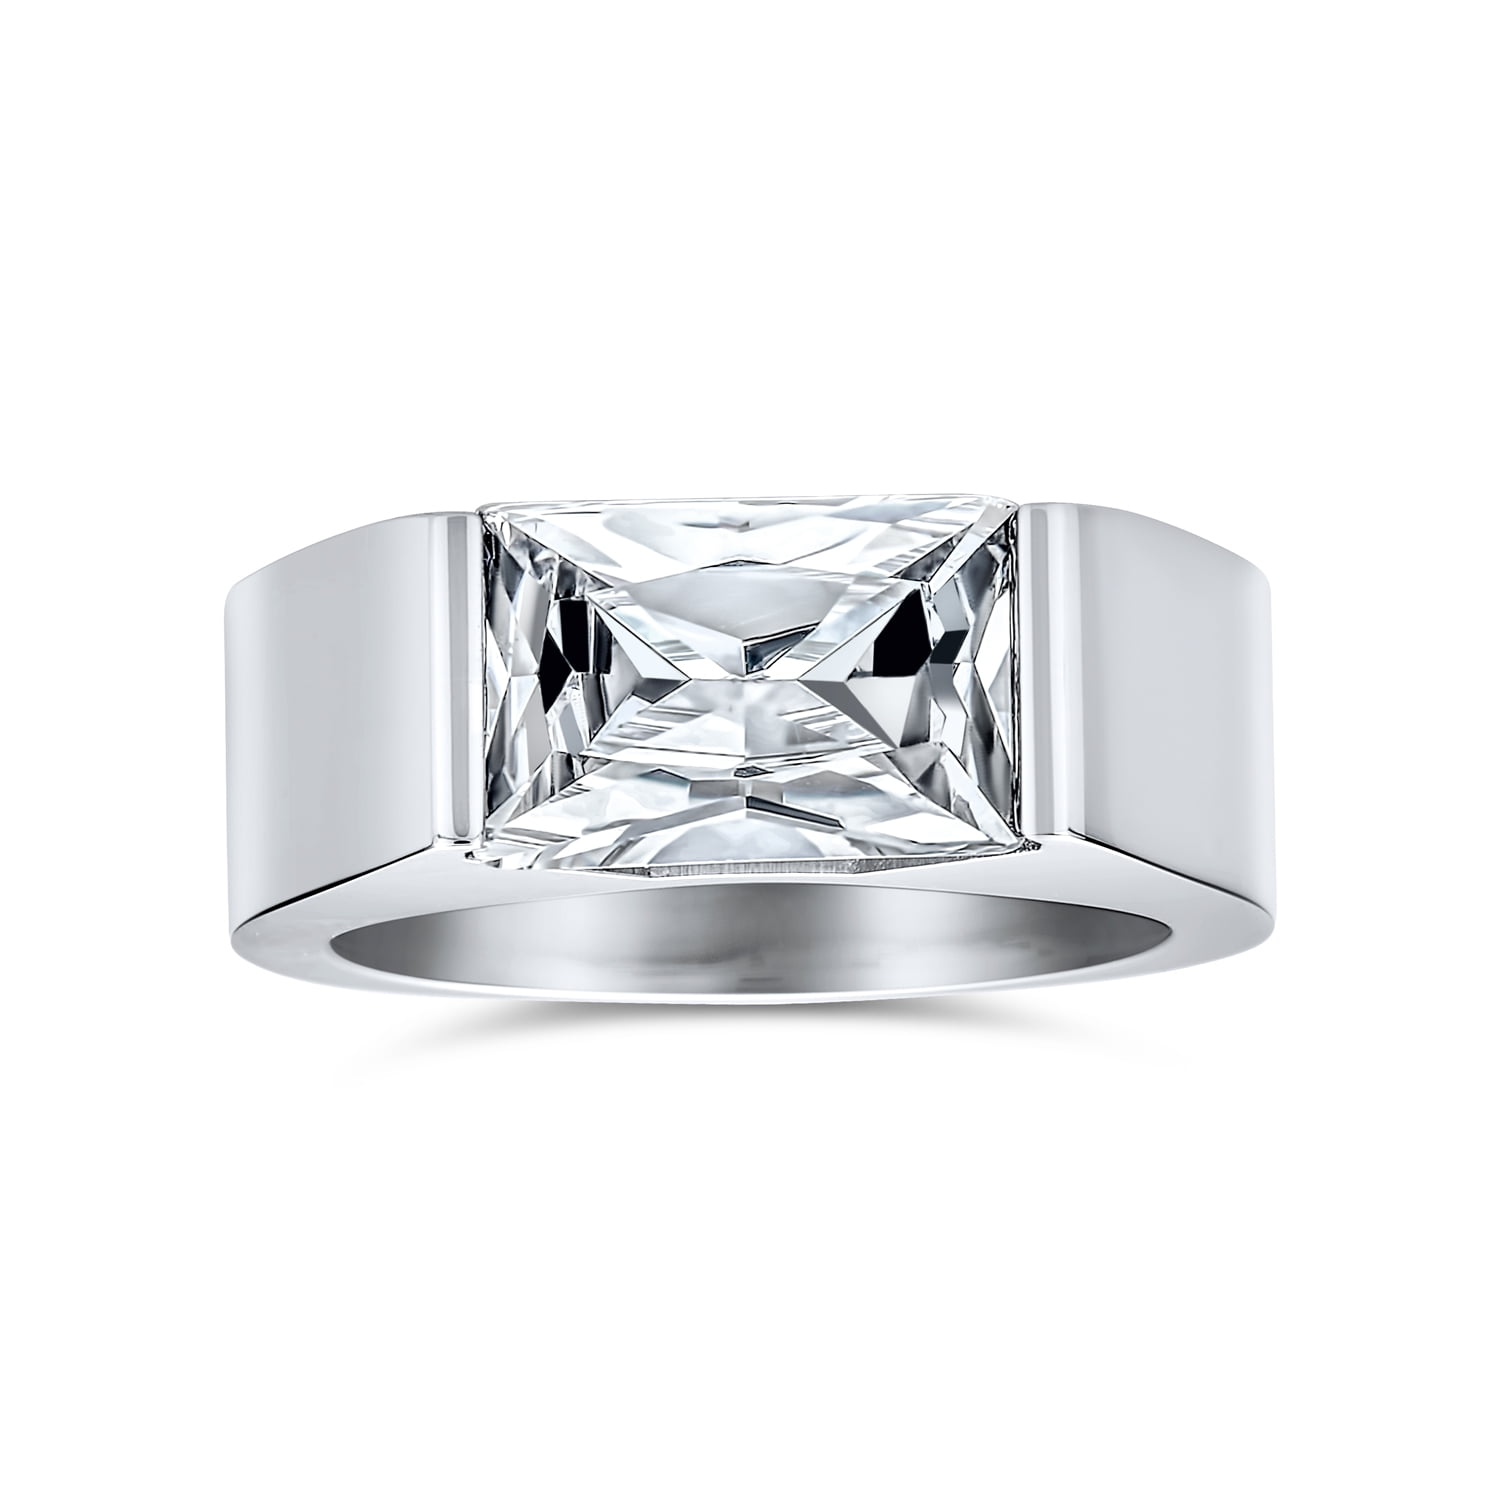 Geometric 4CT Rectangle Clear Colorless Cubic Zirconia Emerald Cut AAA CZ Engagement Ring for Men Tone Stainless Steel - Walmart.com